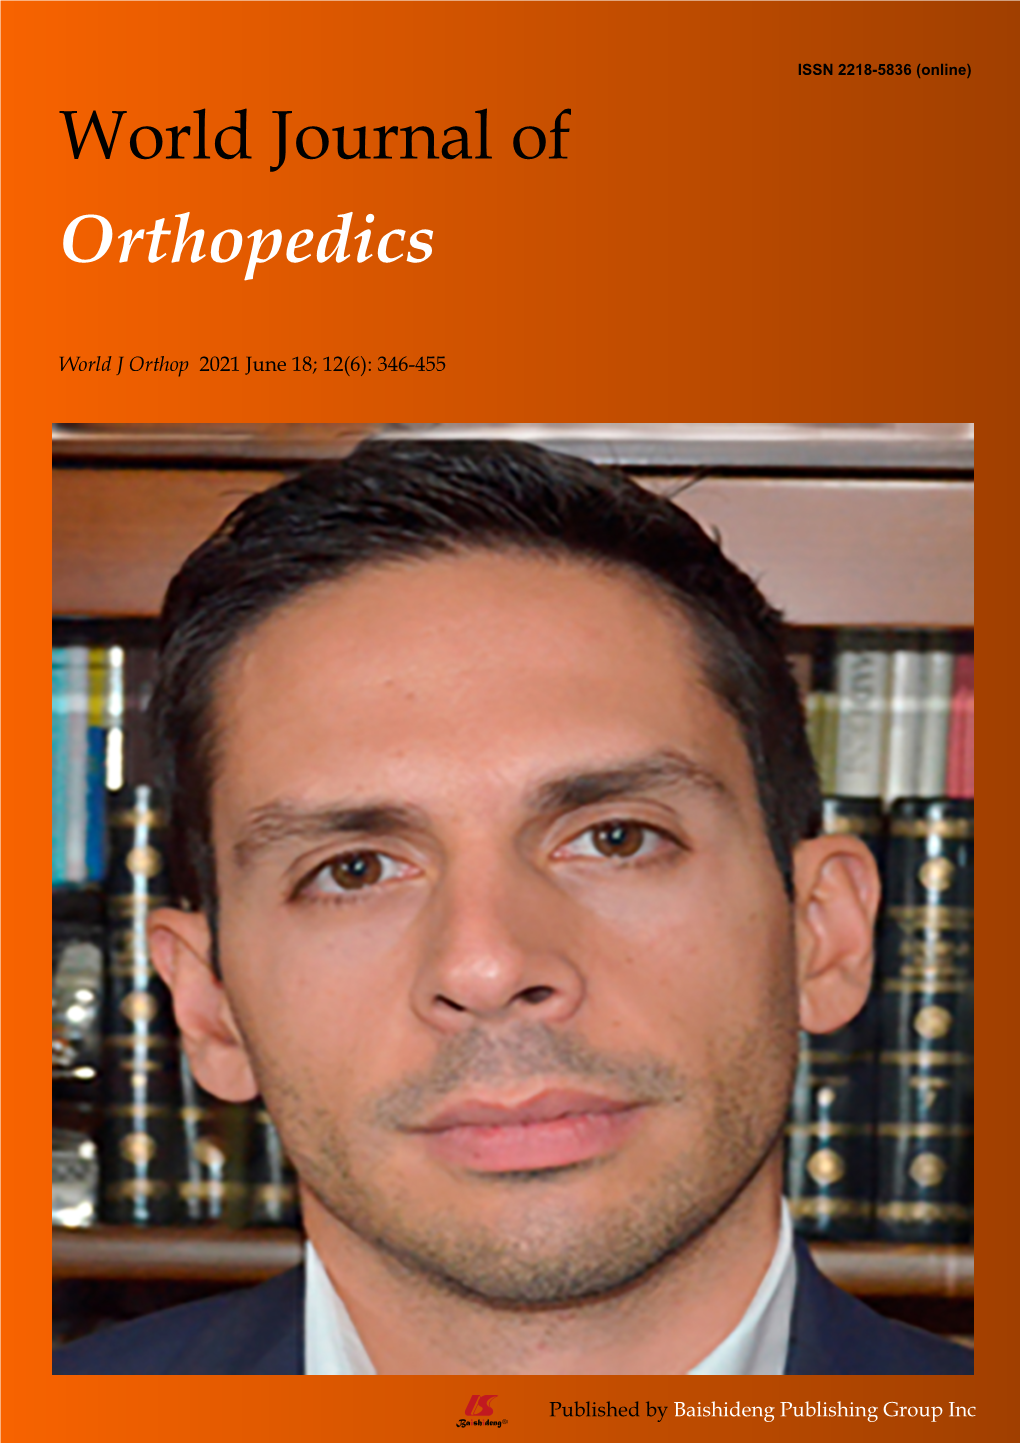 Trends in Leadership at Orthopaedic Surgery Sports Medicine Fellowships